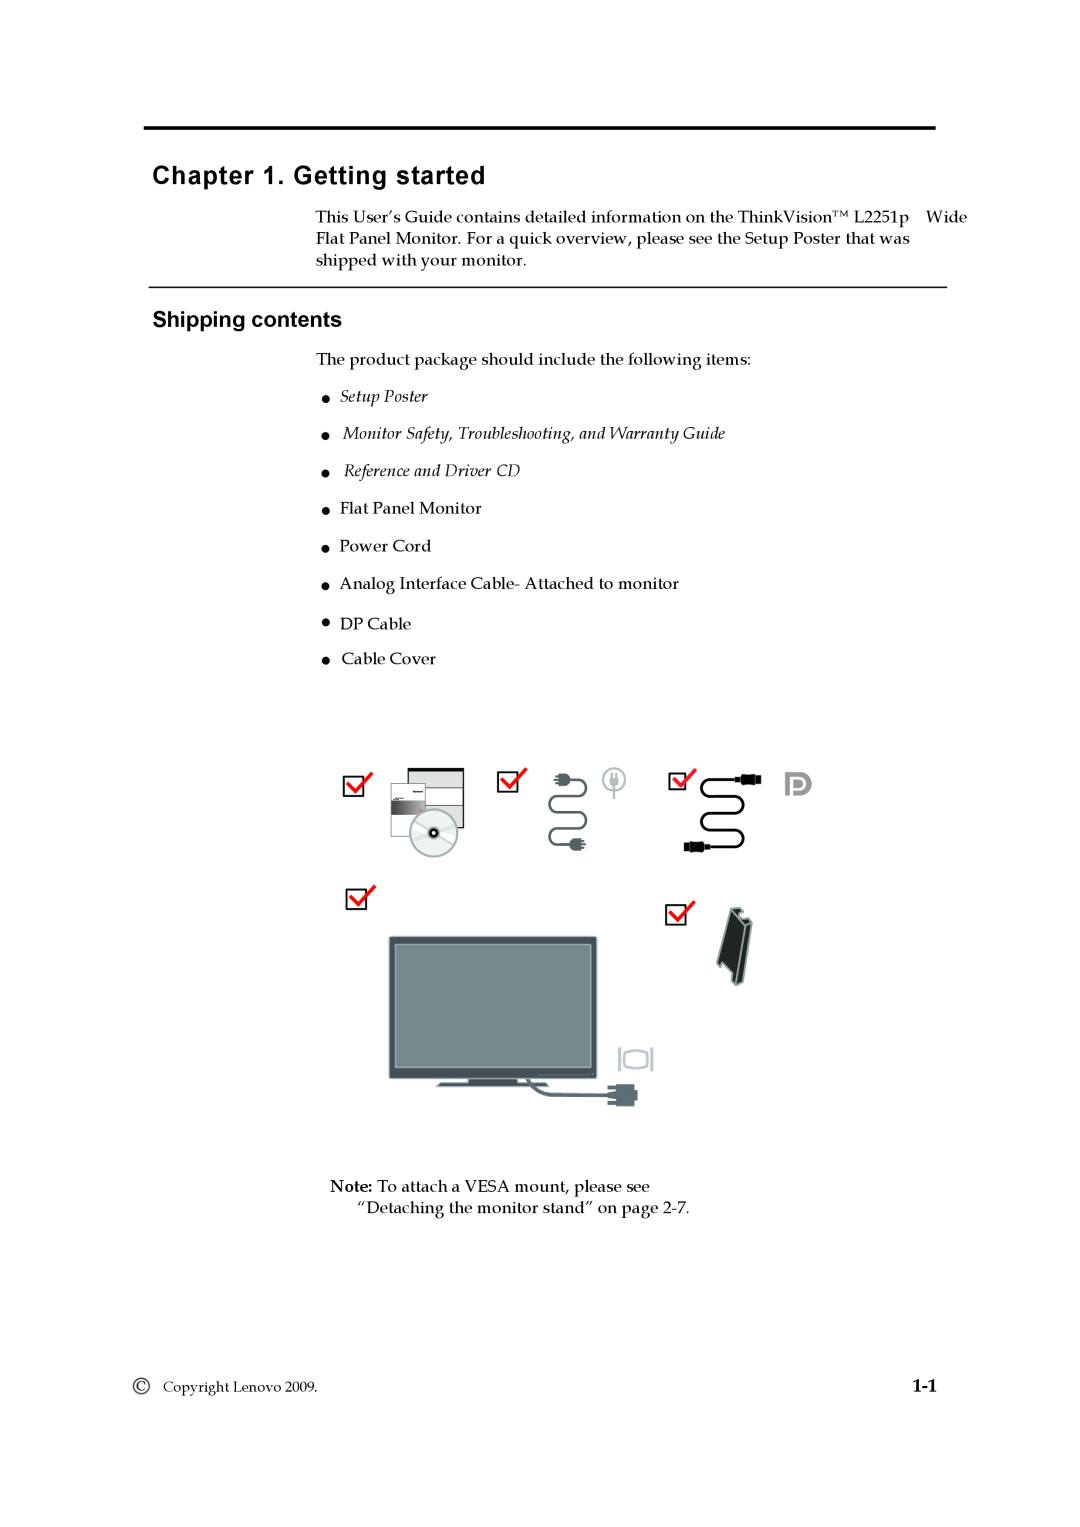 Lenovo L2251p manual Getting started, Shipping contents, Setup Poster Monitor Safety, Troubleshooting, and Warranty Guide 